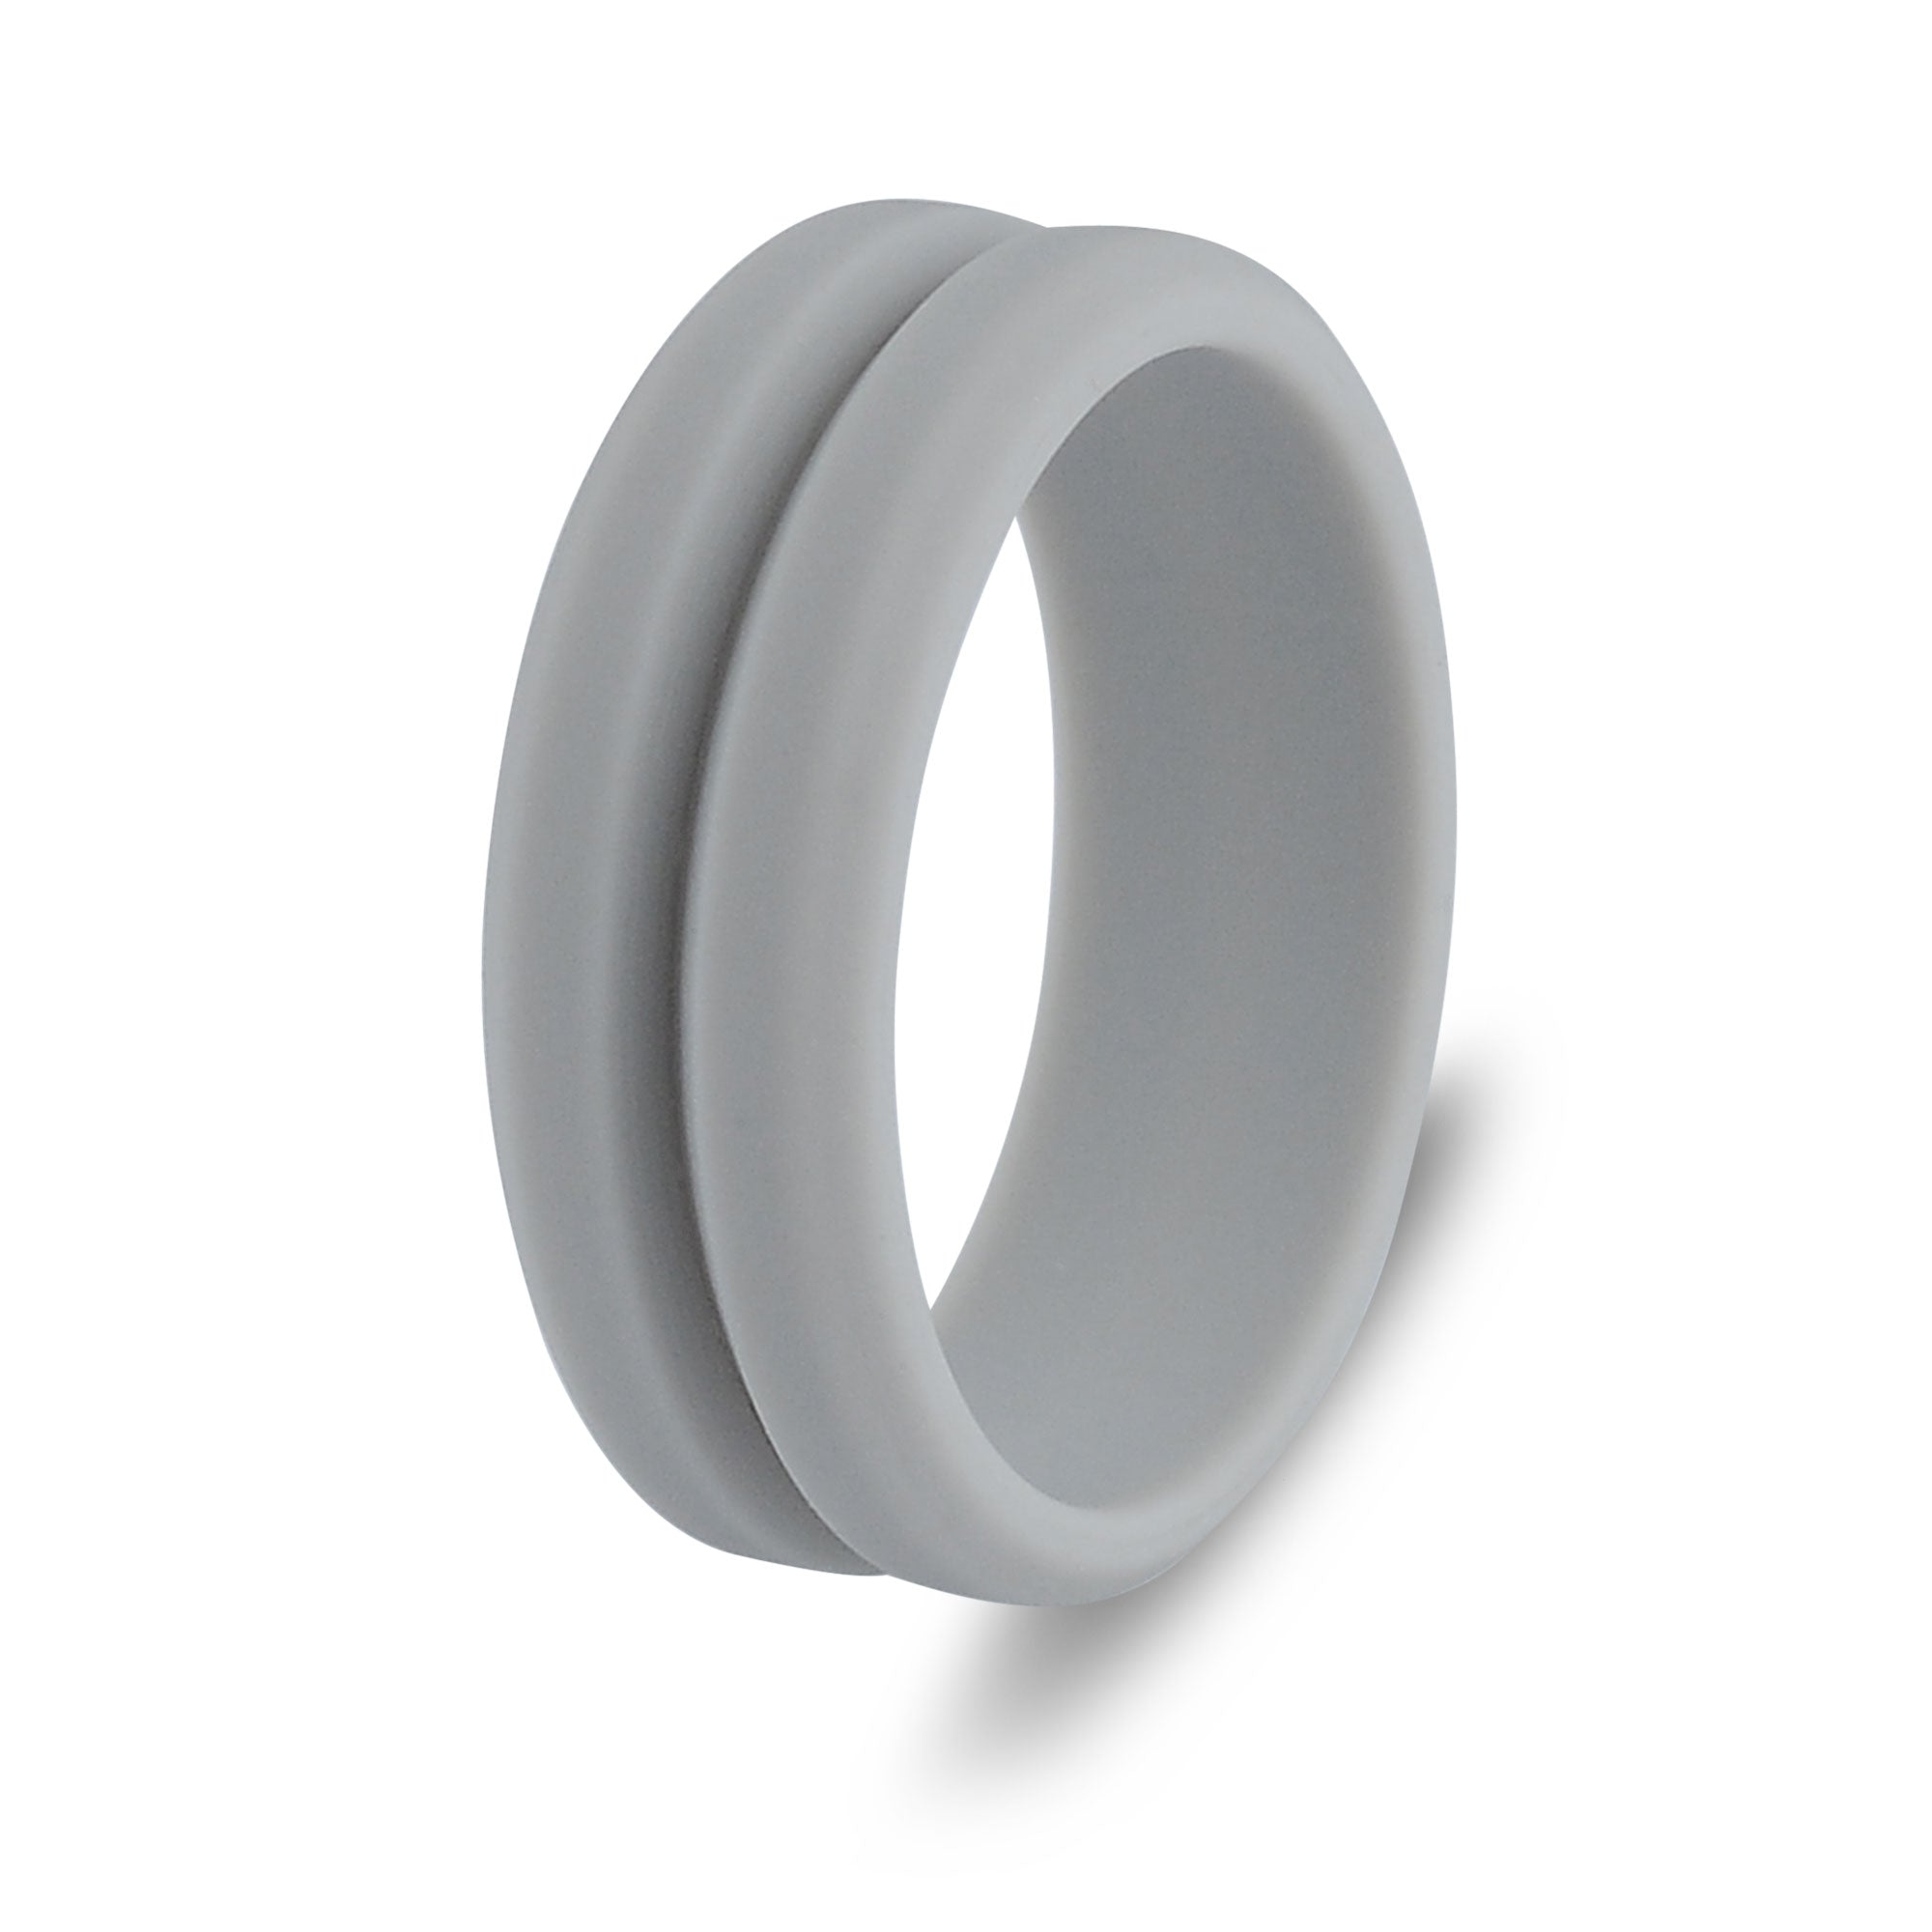 The Frosty - Silicone Ring